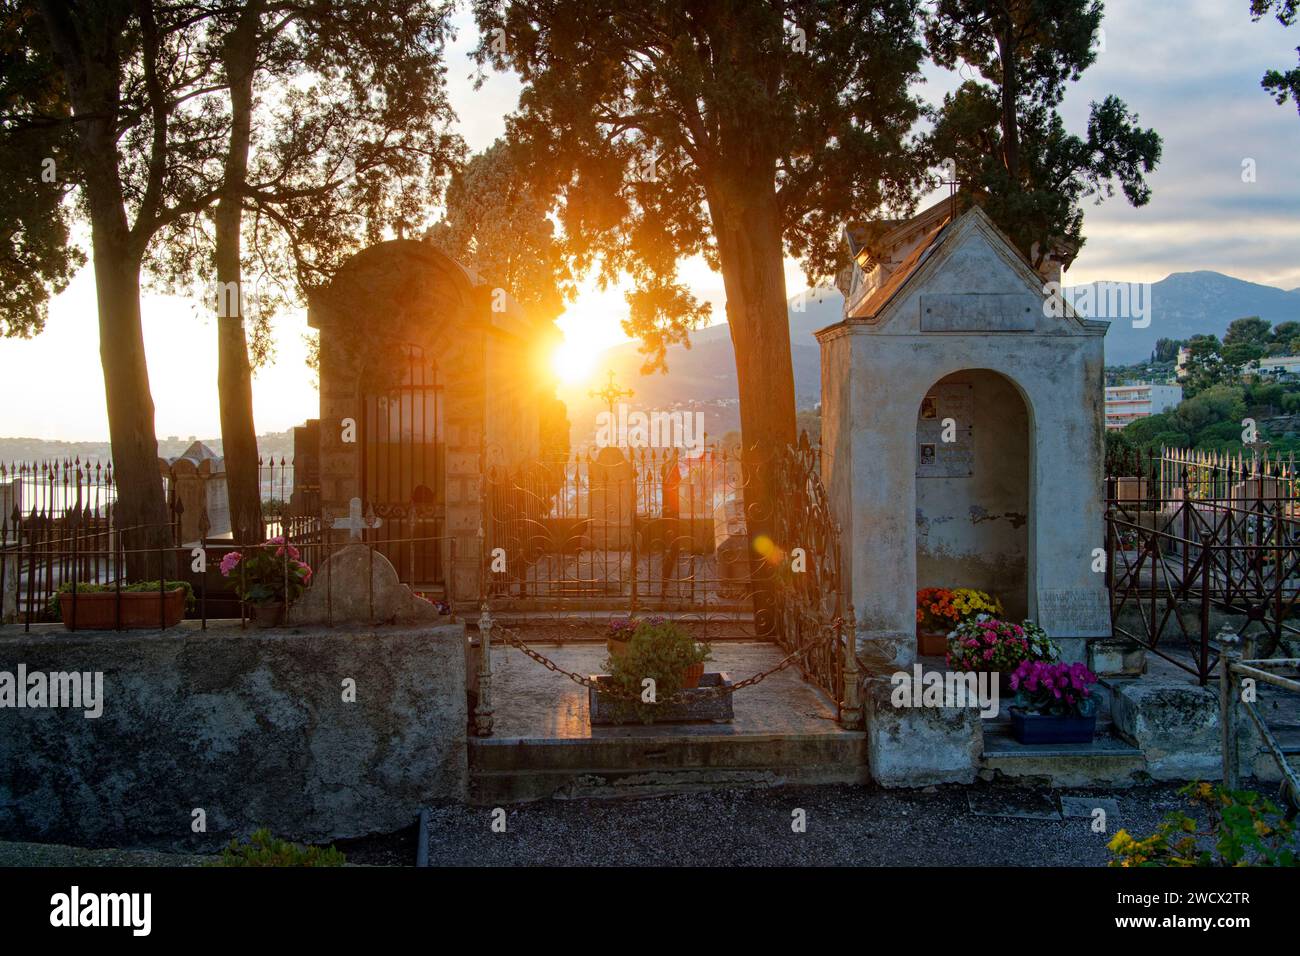 France, Alpes Maritimes, Cote d'Azur, Menton, old town, the Old Castle cemetery, marine cemetery Stock Photo